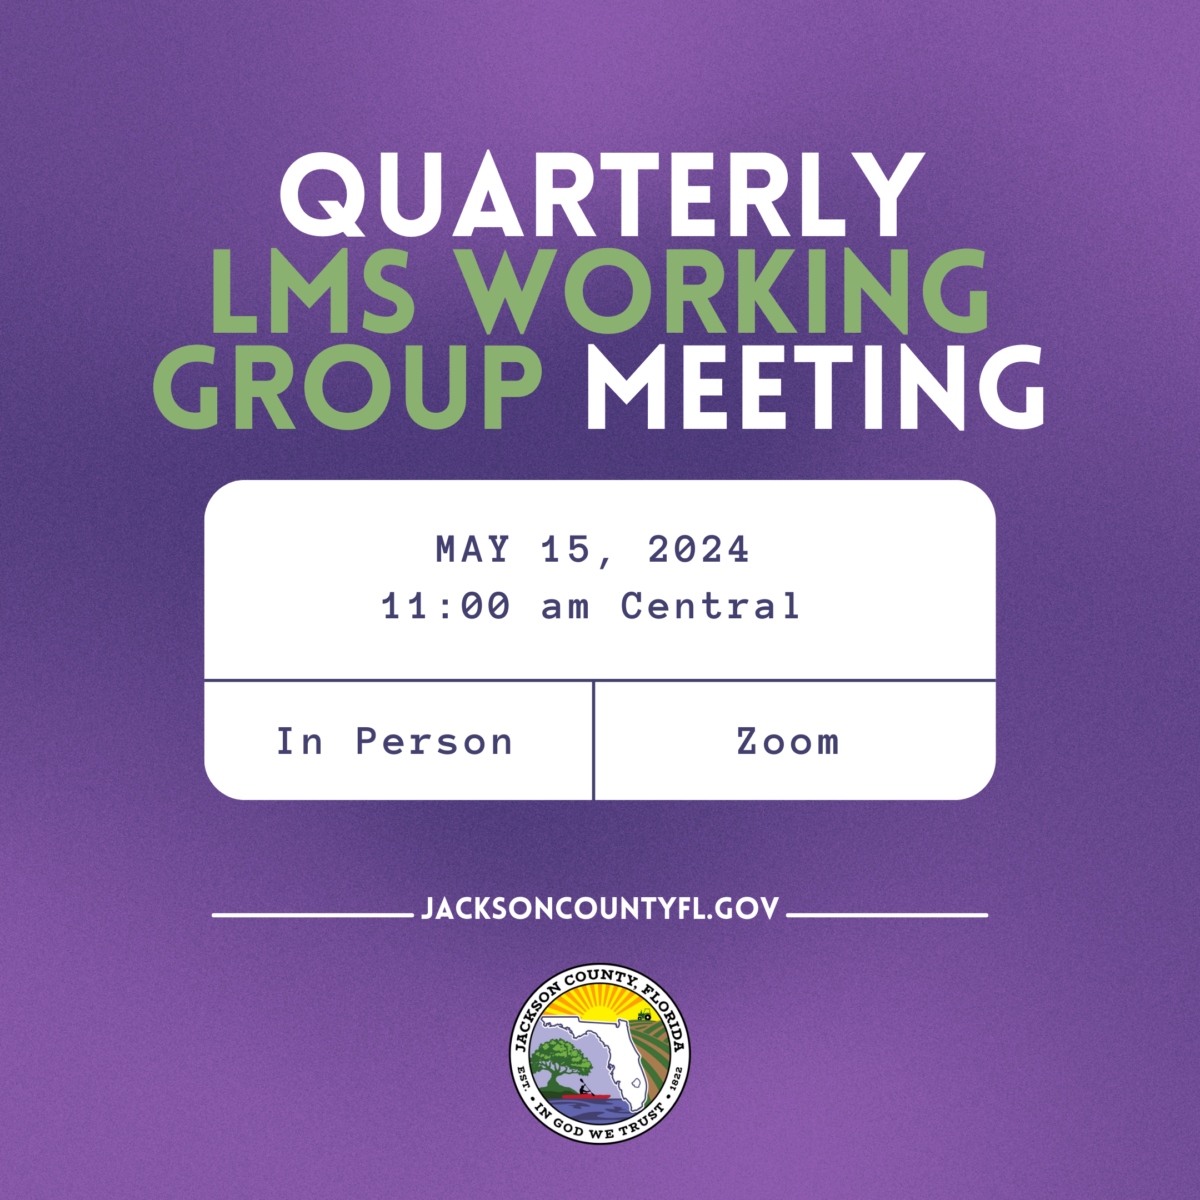 Picture of Notice of LMS Working Group Quarterly Meeting on May 15, 2024 at 11:00 AM Central Time